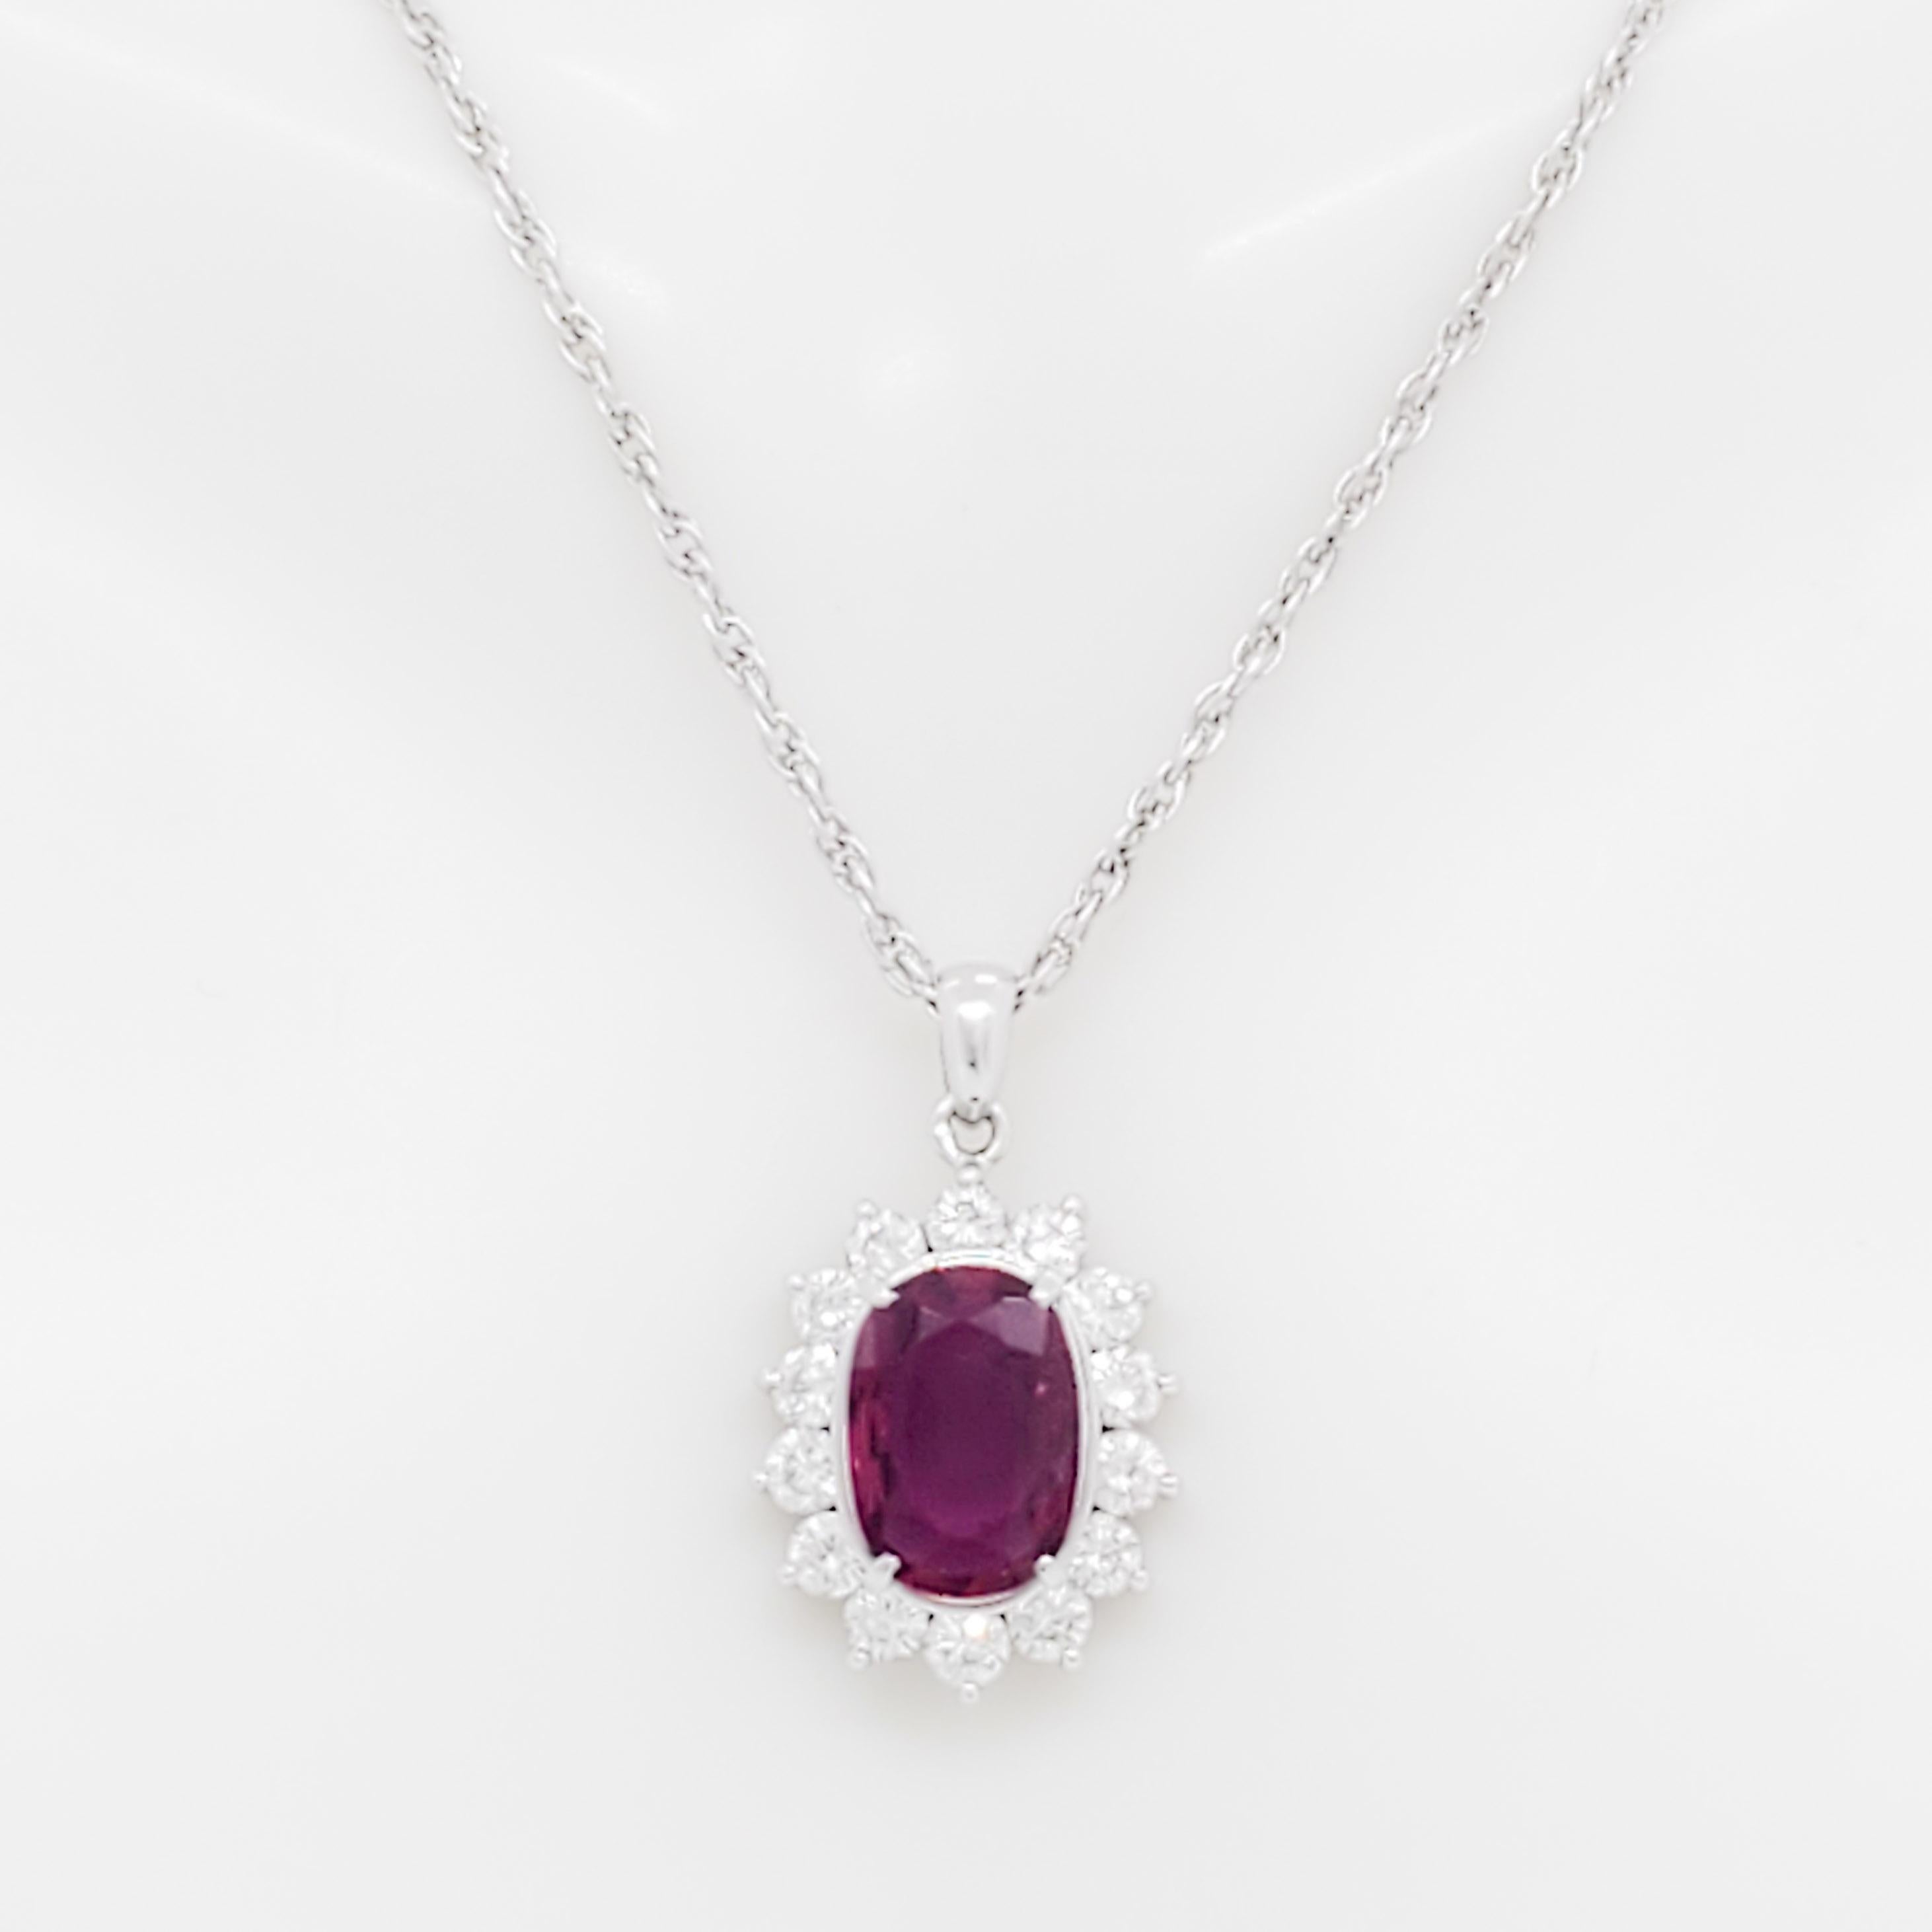 Gorgeous 2.04 ct. ruby oval with 0.82 ct. good quality white diamond rounds.  Handmade in platinum.  Length of chain is 16